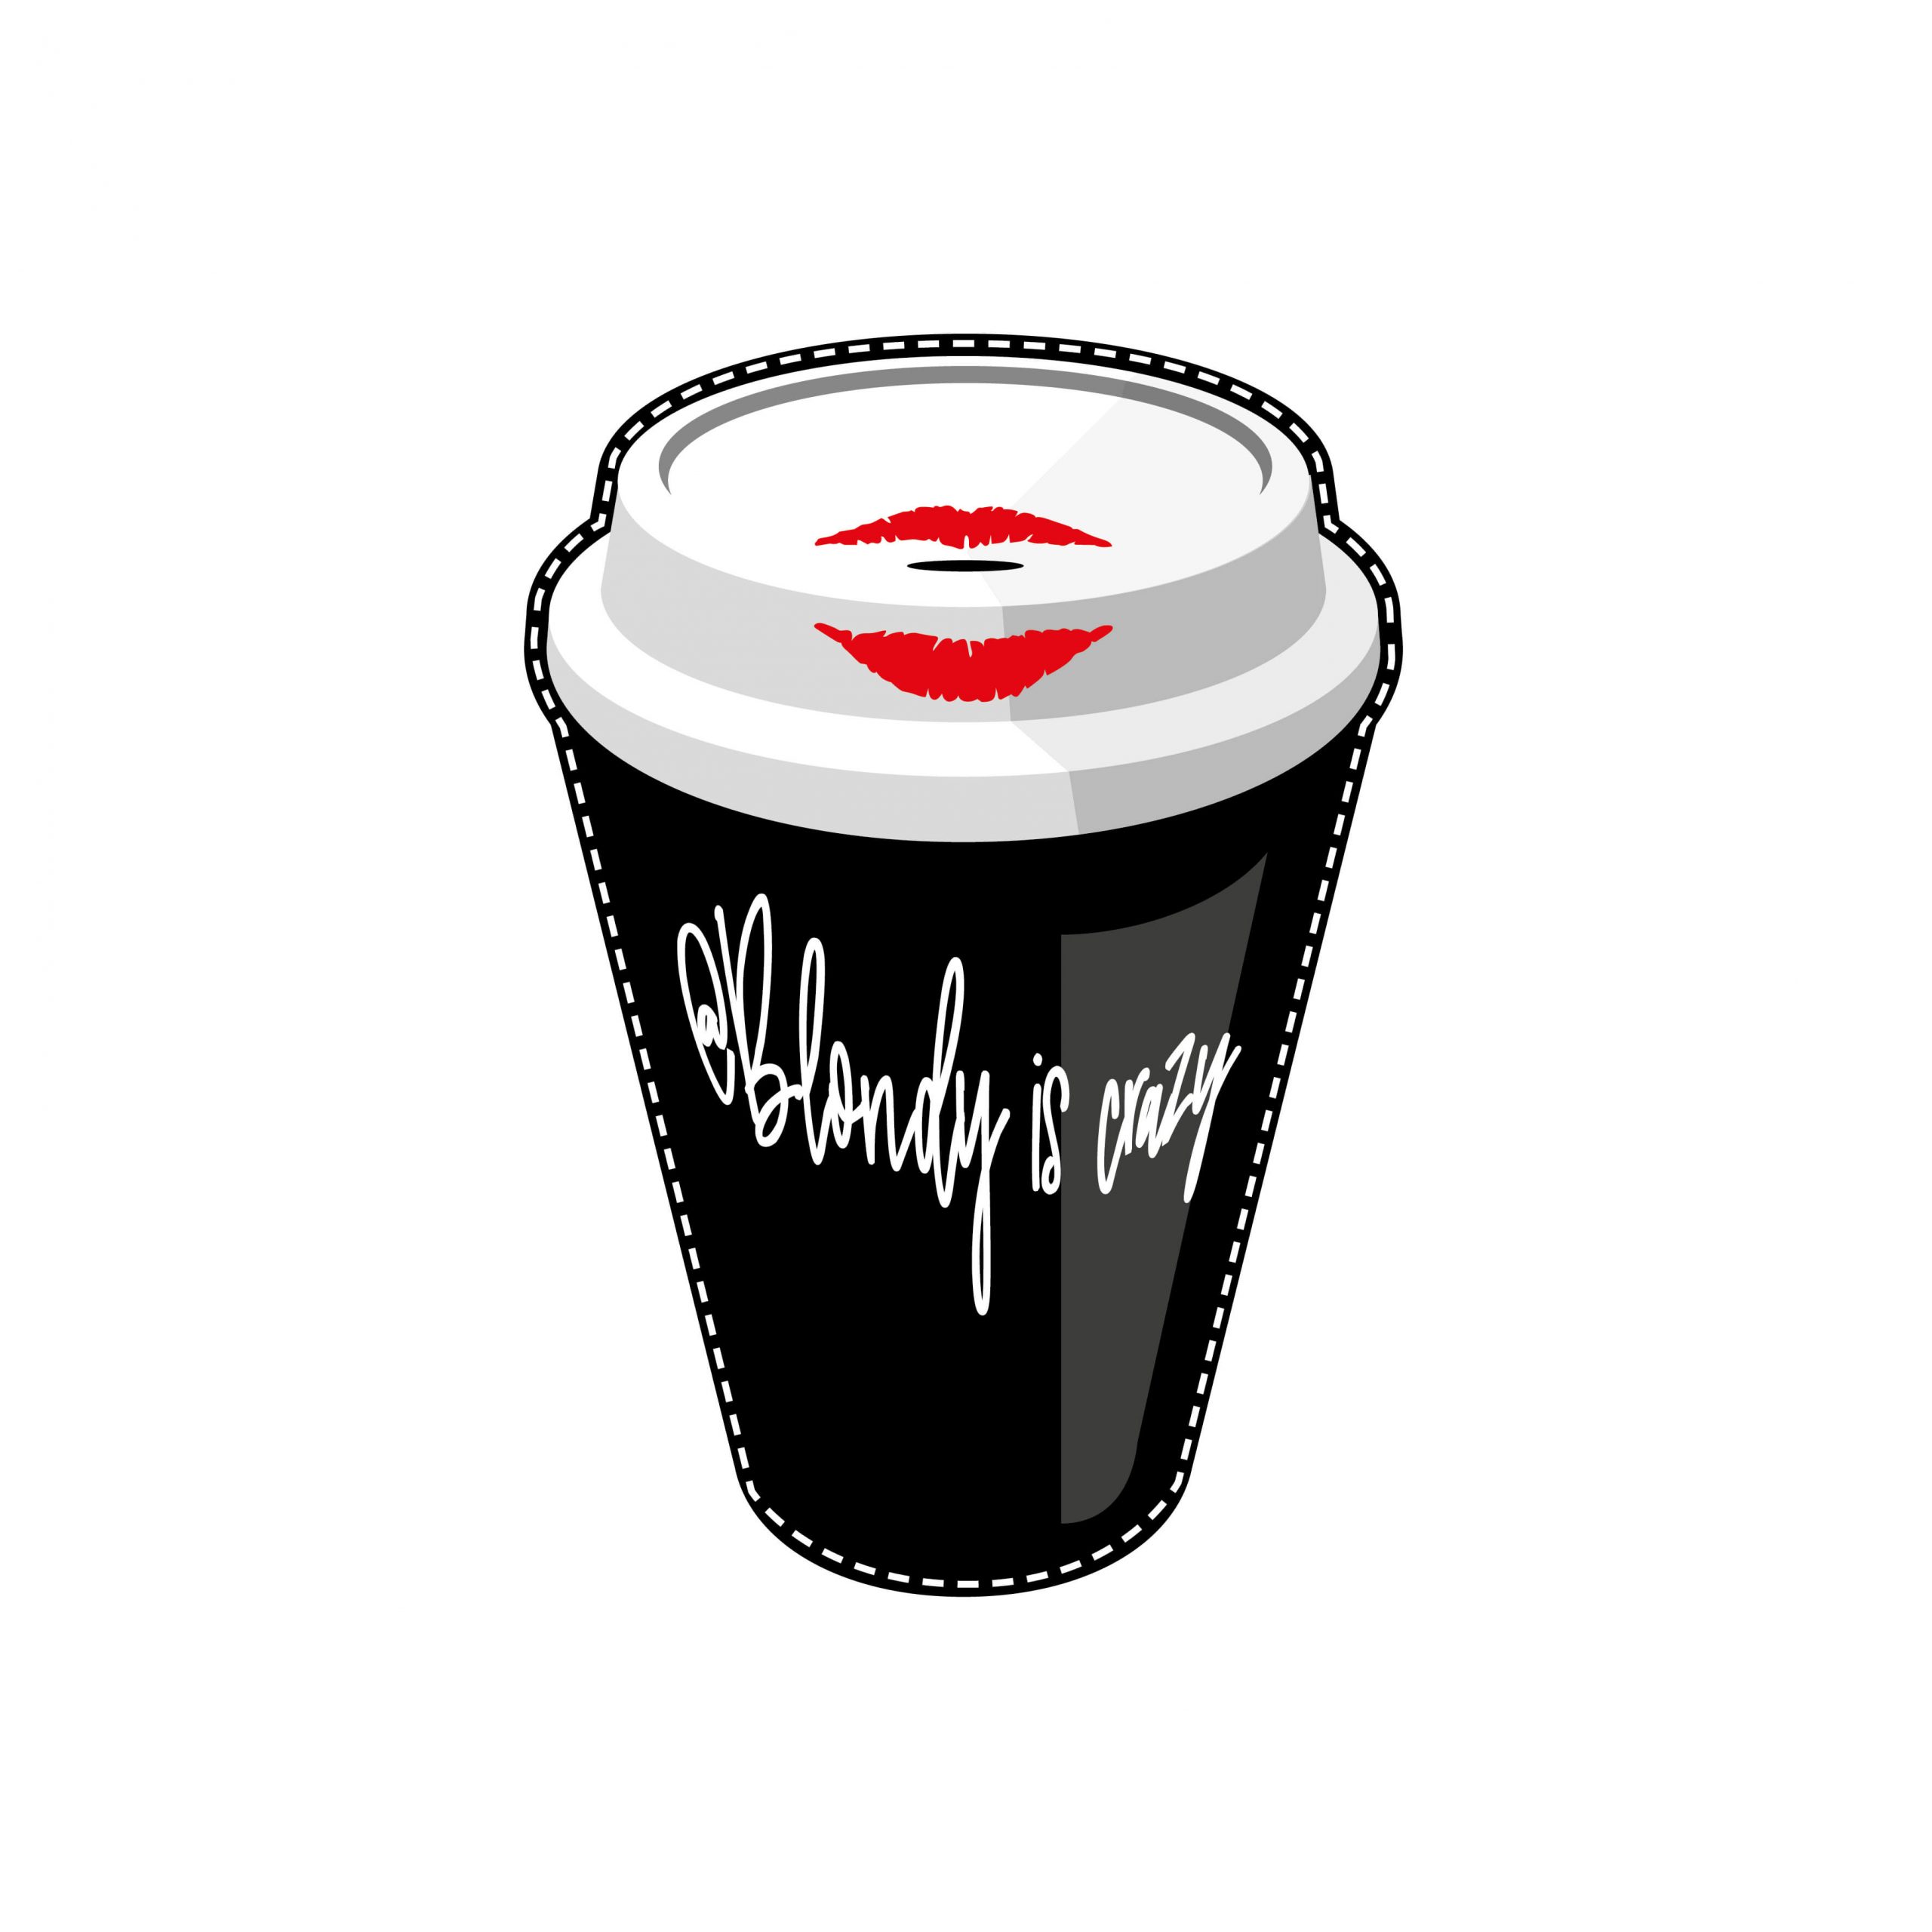 Coffee Lips by Blondy is Crazy